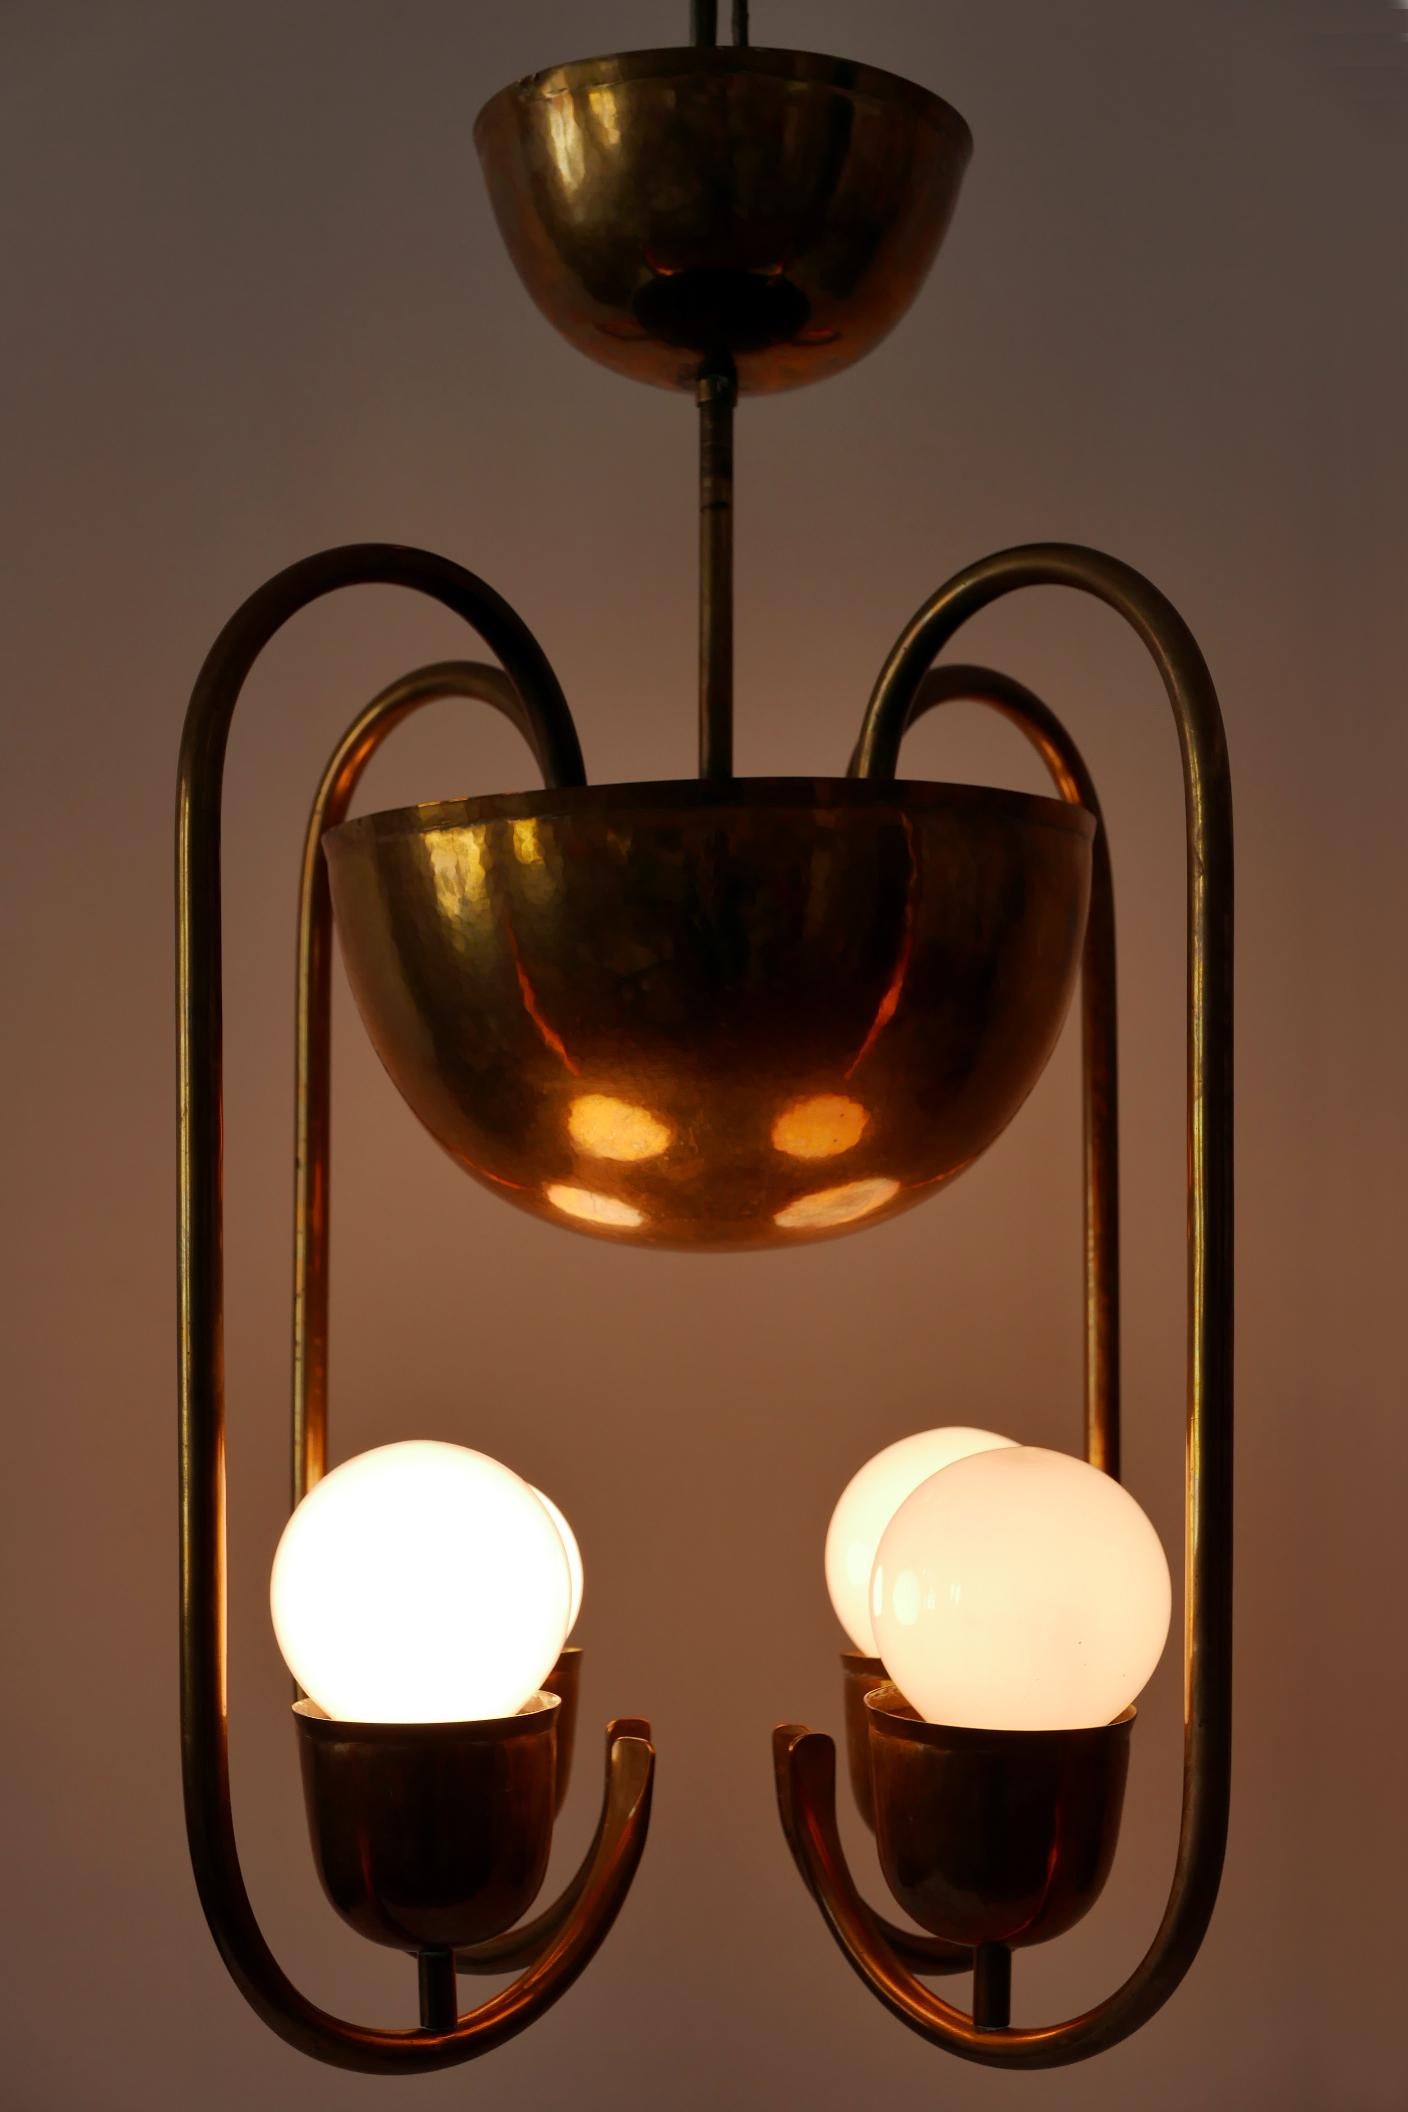 Unique work of the famous Bauhaus metal artist Hayno Focken: four-armed Bauhaus / Art Deco chandelier or pendant lamp in hammered solid brass. Probably a custom work in 1930s, Lahr, Germany.
Makers mark to the canopy (see the last image).

Hayno